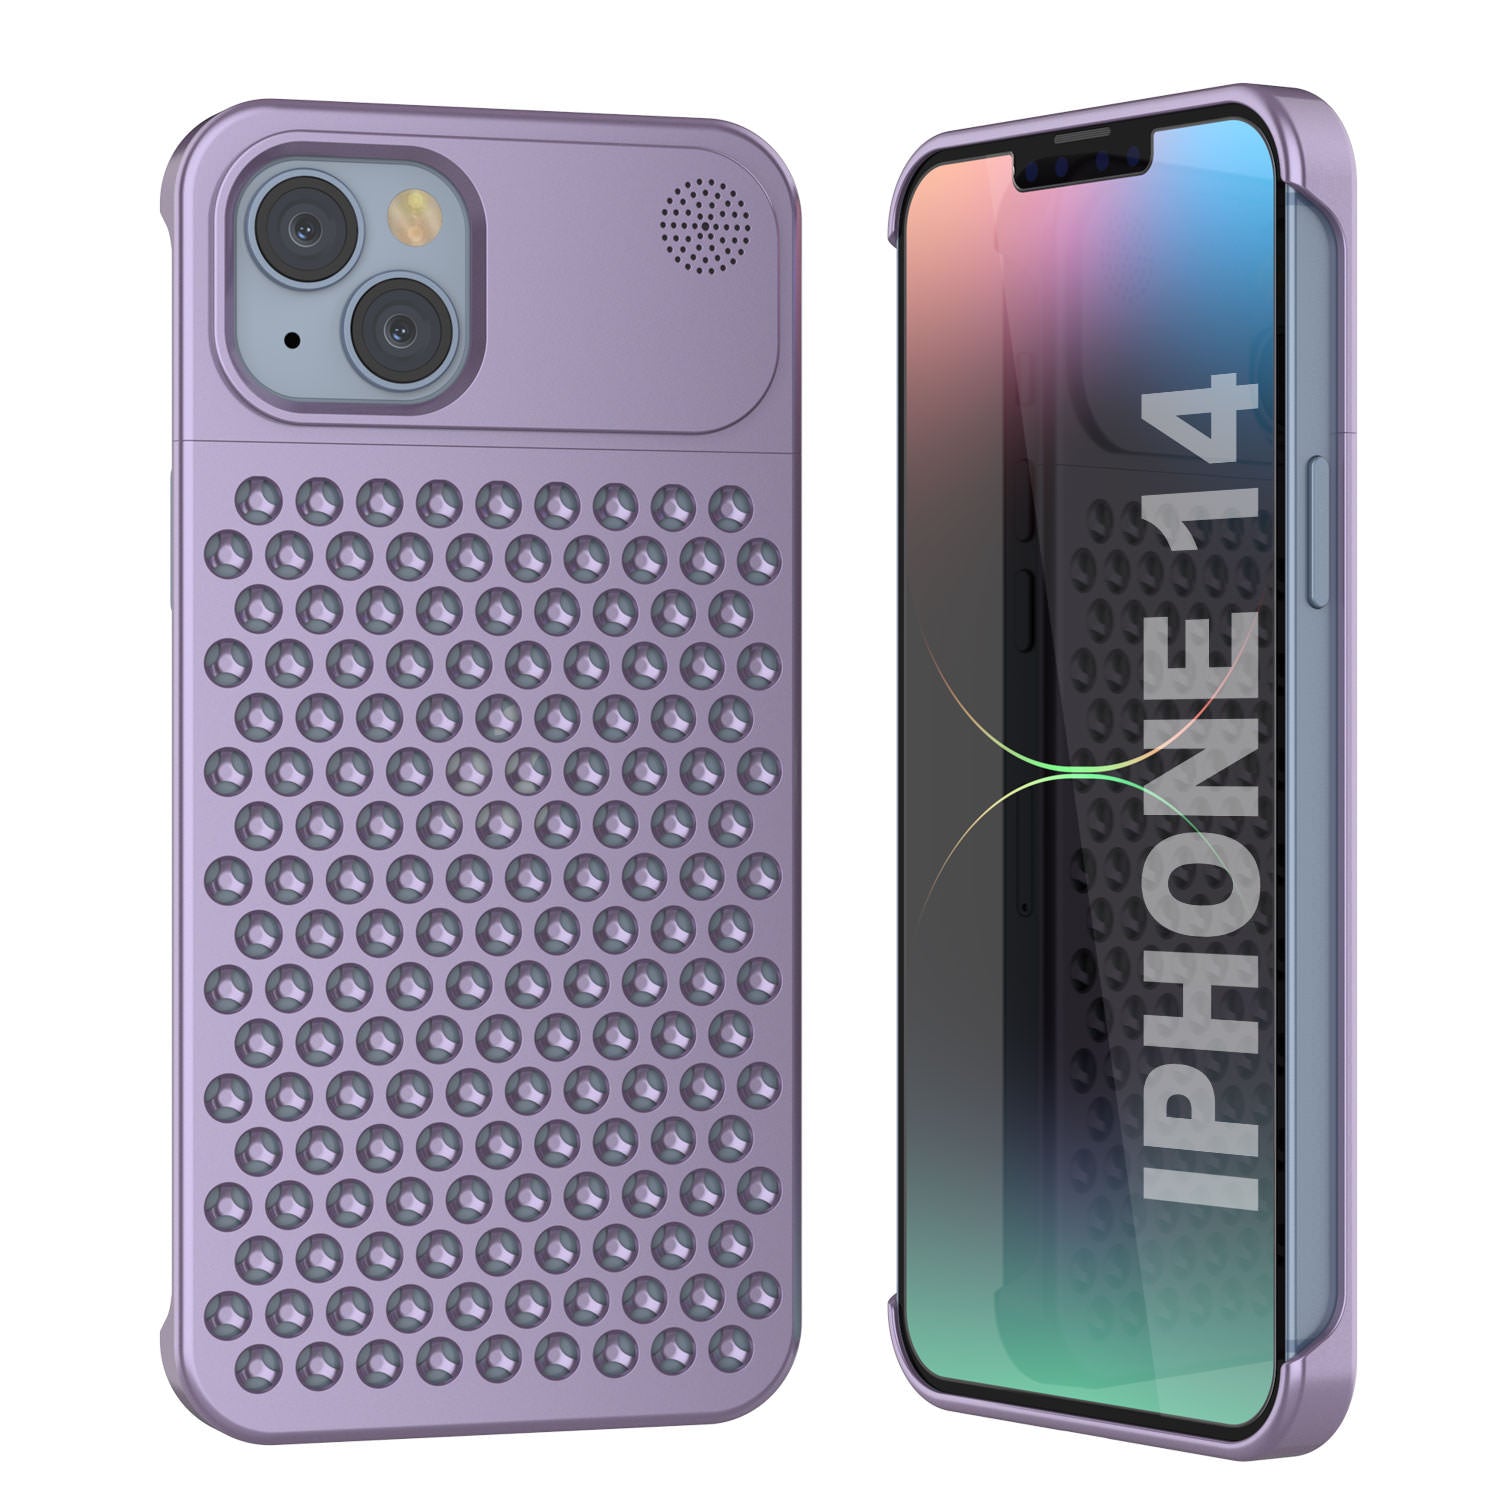 PunkCase for iPhone 14 Aluminum Alloy Case [Fortifier Extreme Series] Ultra Durable Cover [Liliac]